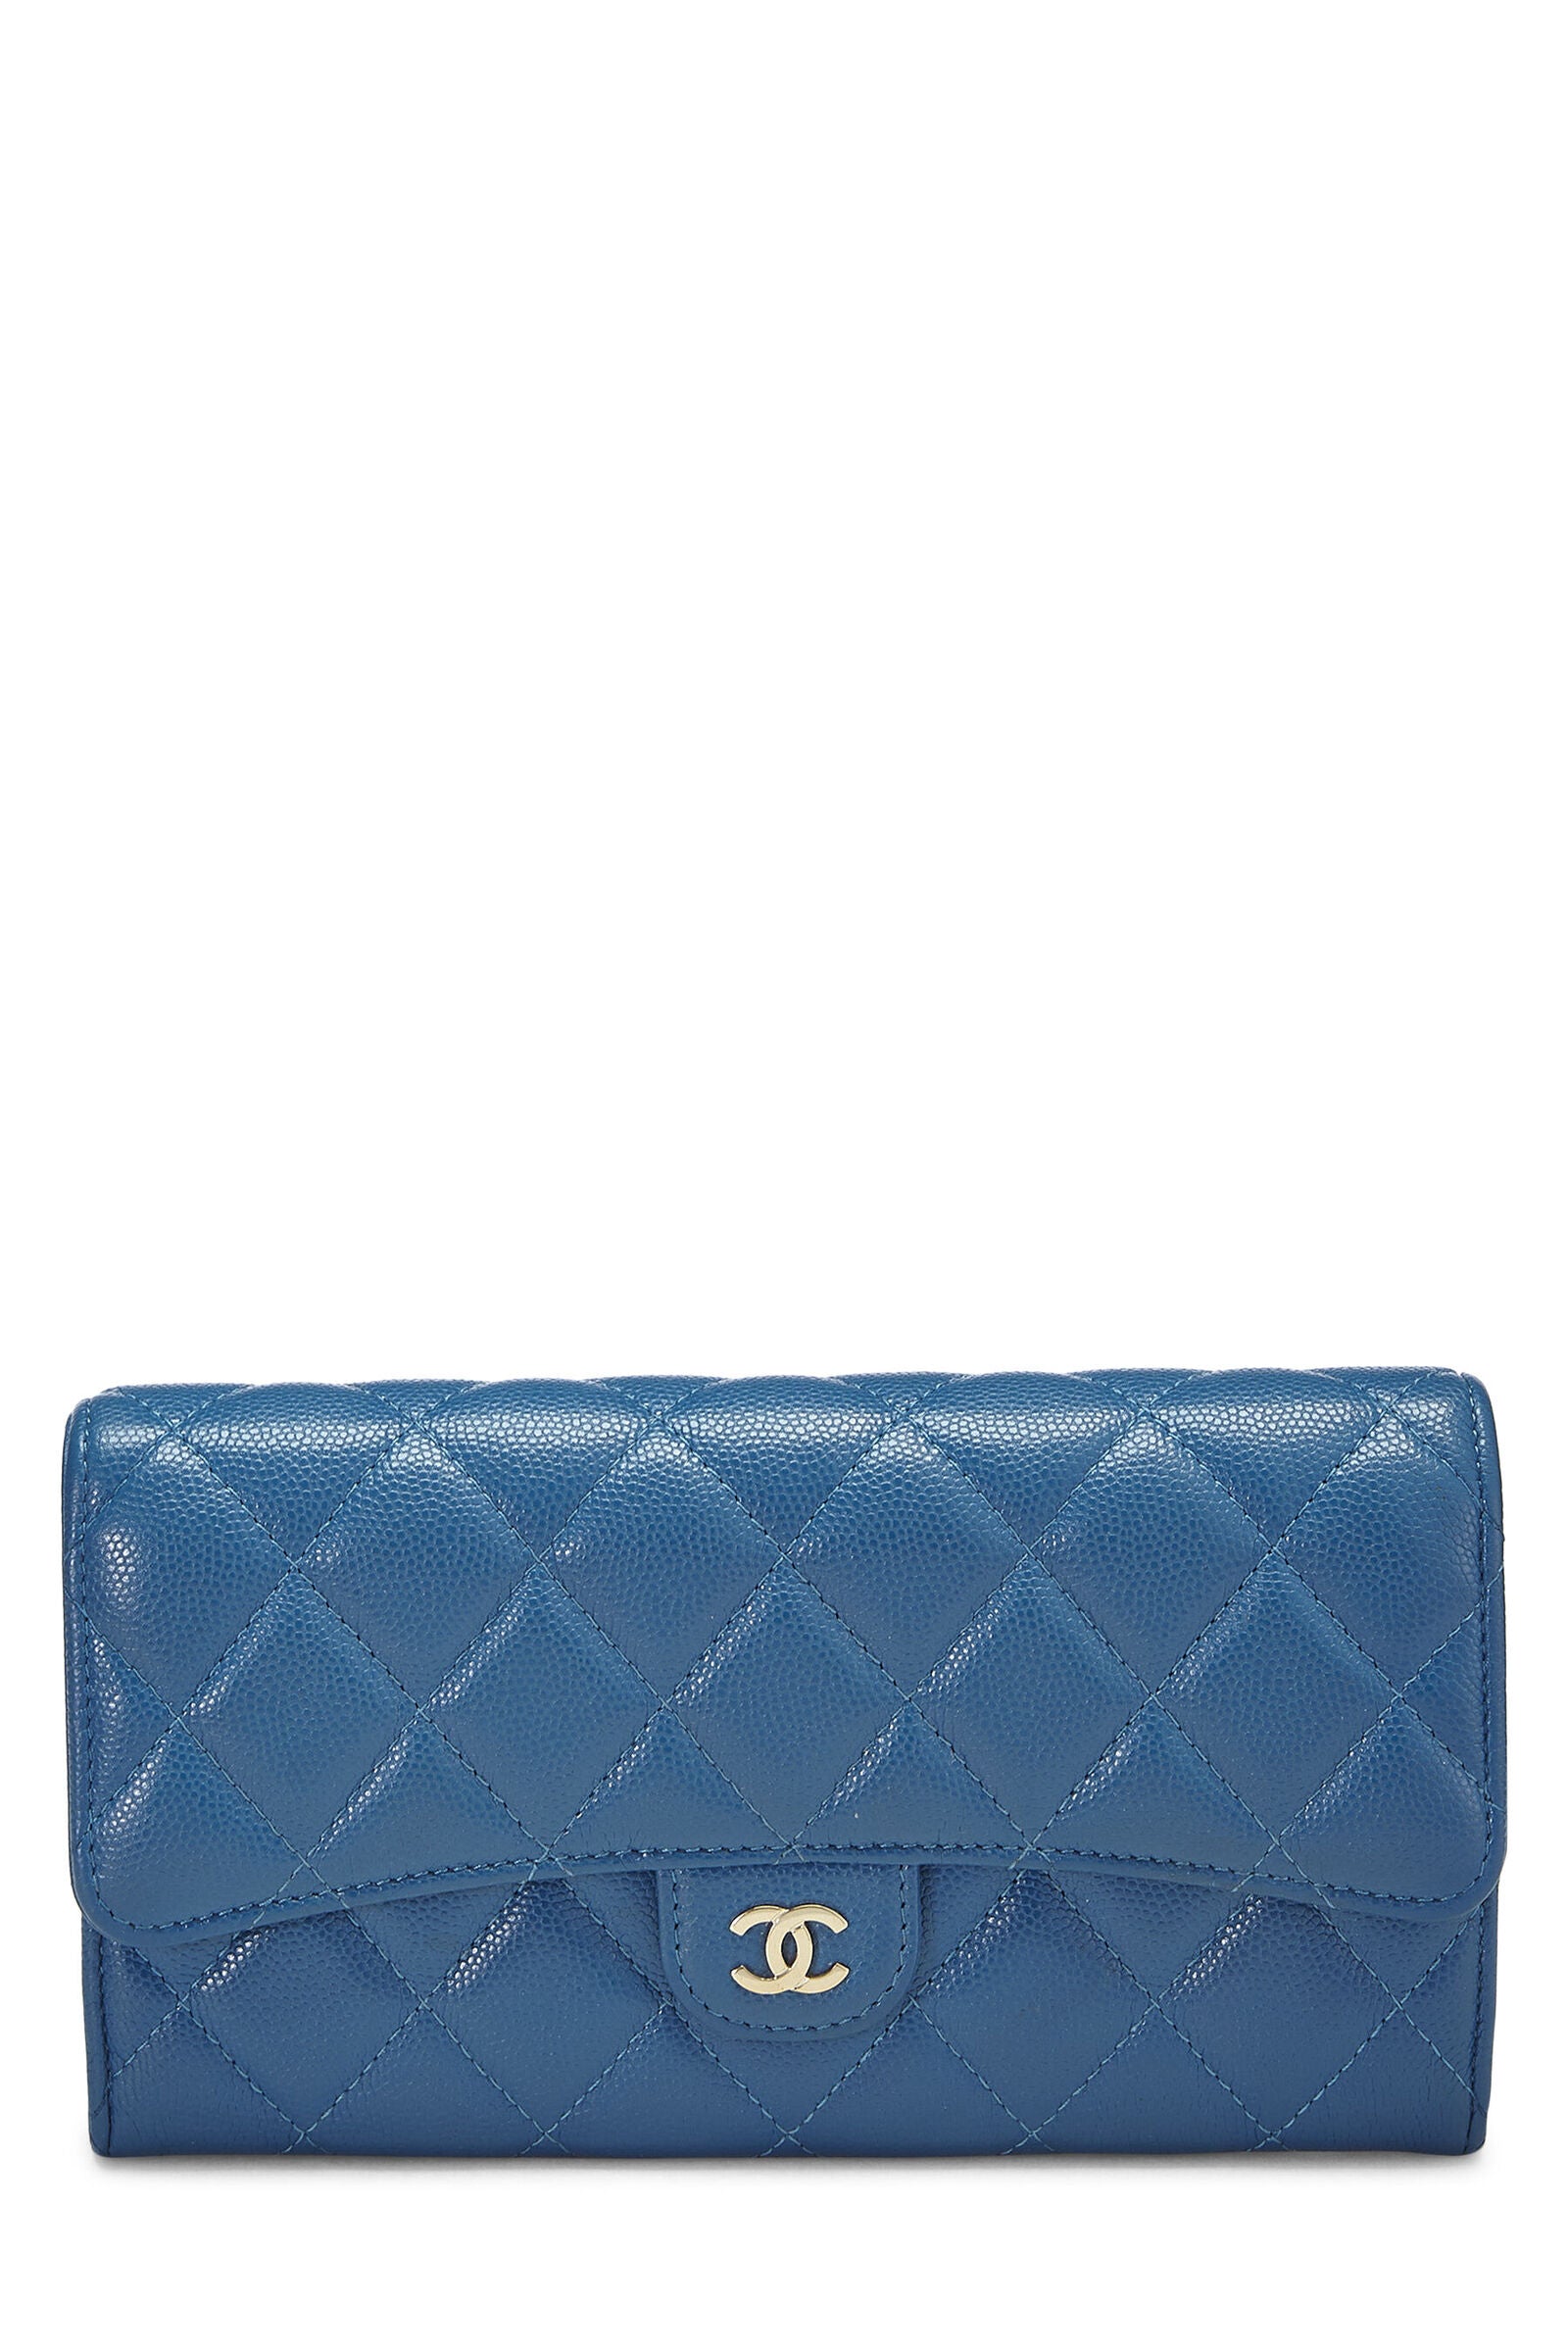 CHANEL CAVIAR QUILTED LAMBSKIN CLASSIC FLAP WALLET – Caroline's